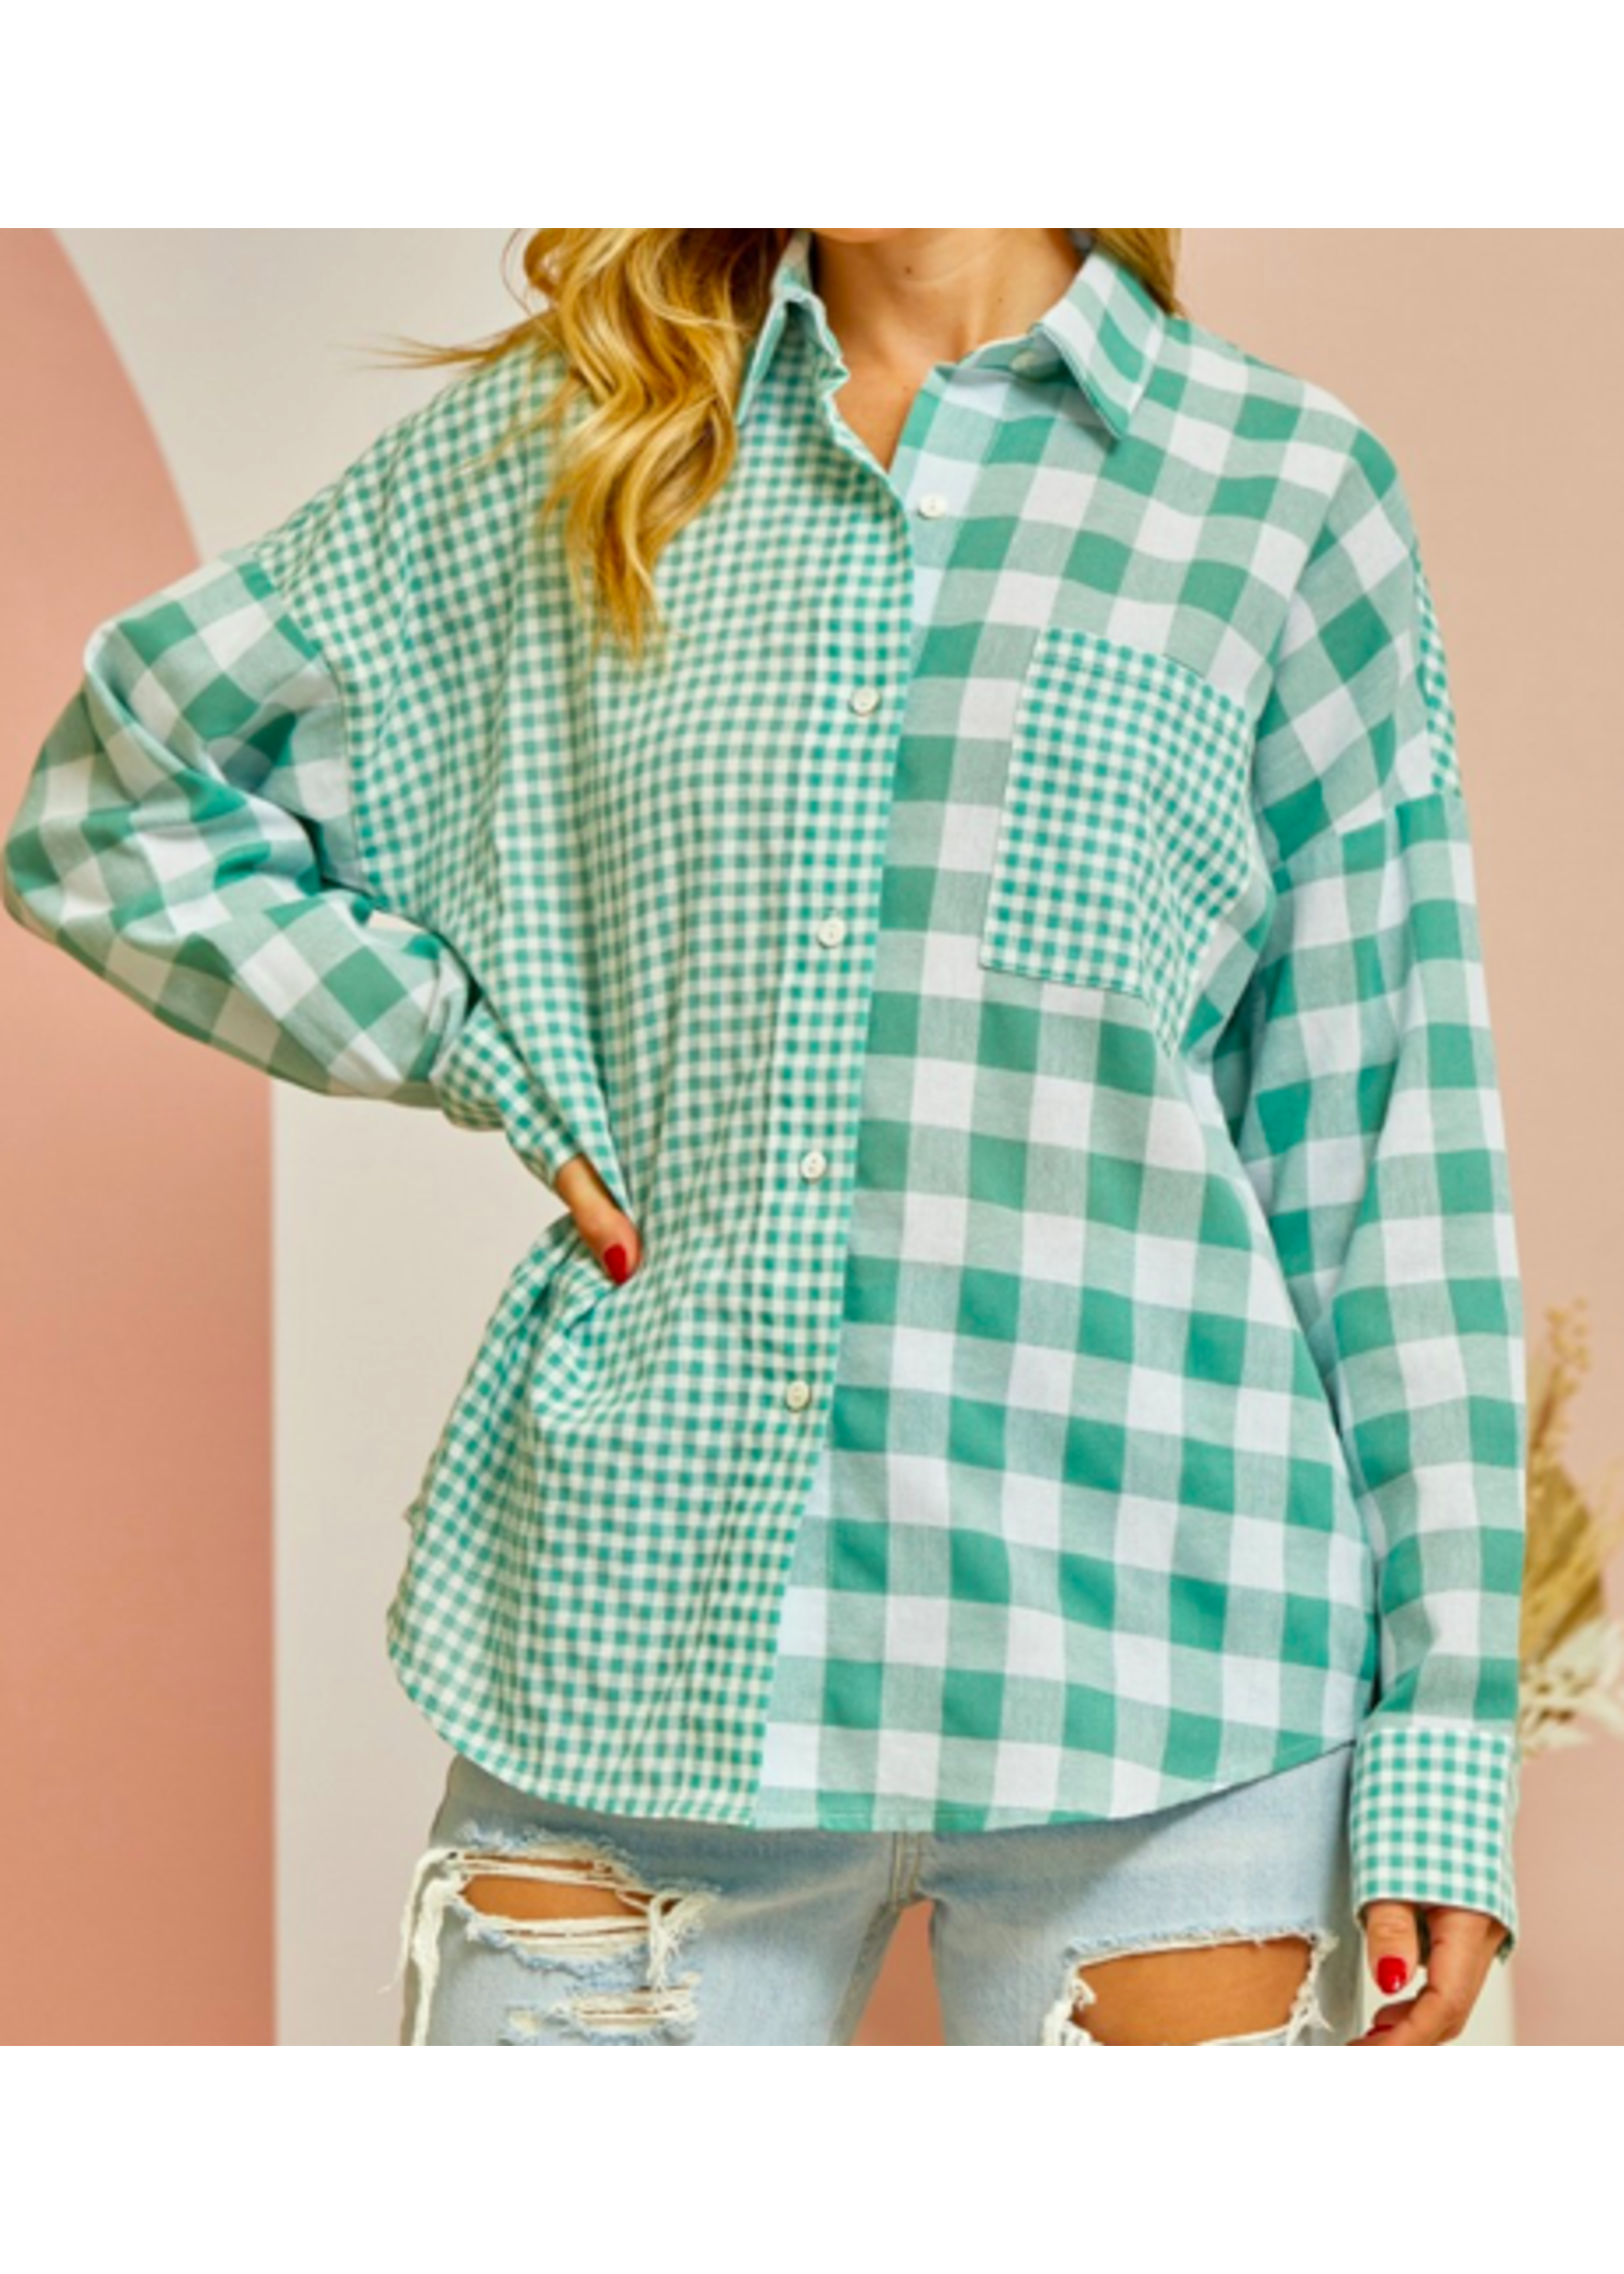 Andree By Unit SAGE BUTTON DOWN GINGHAM